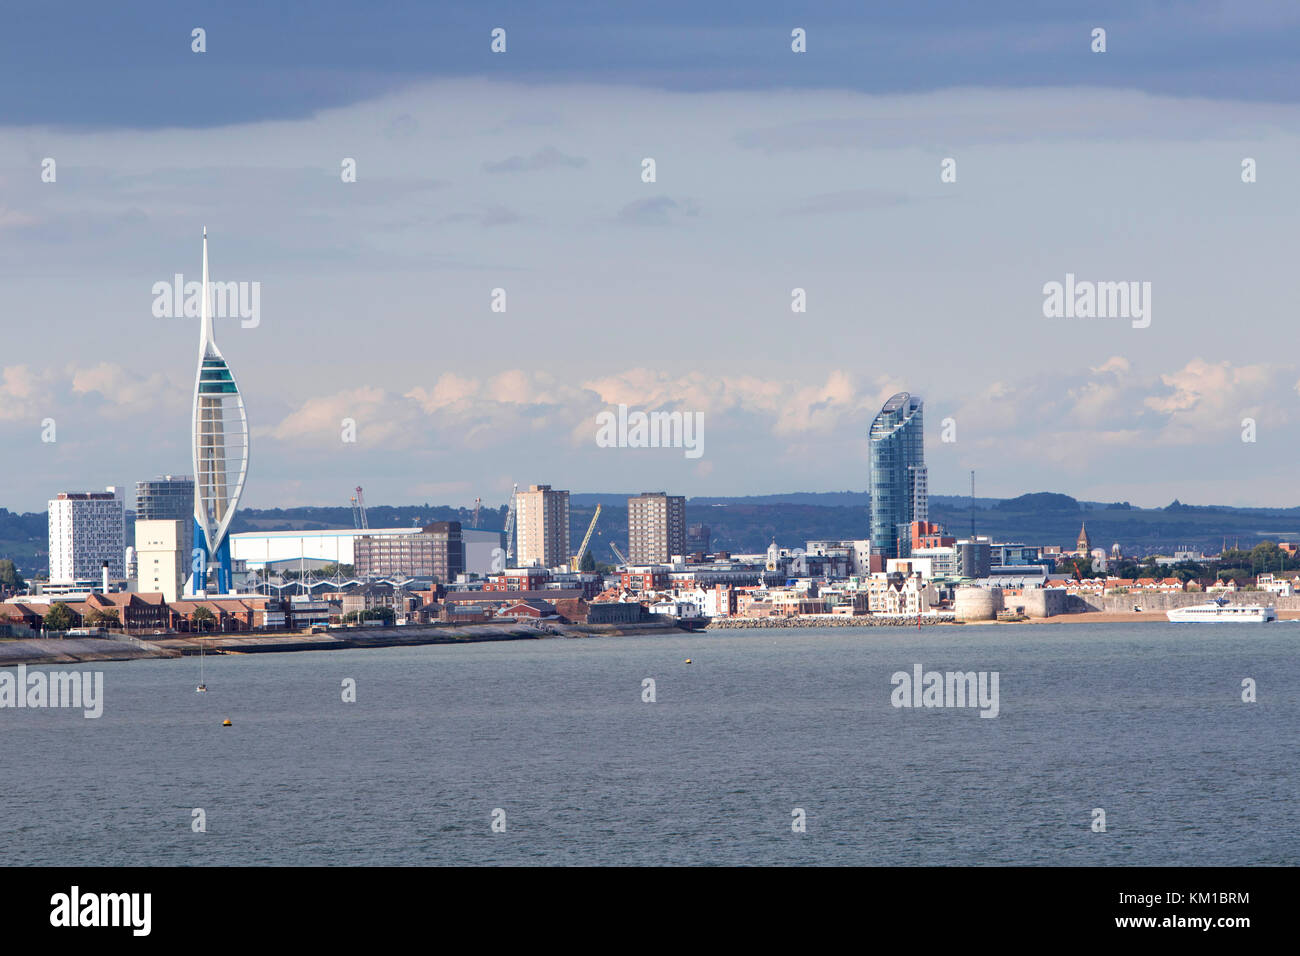 City scape of the Spinnaker Tower, or the Millennium Tower at Gunwharf Quays, Portsmouth, England Stock Photo